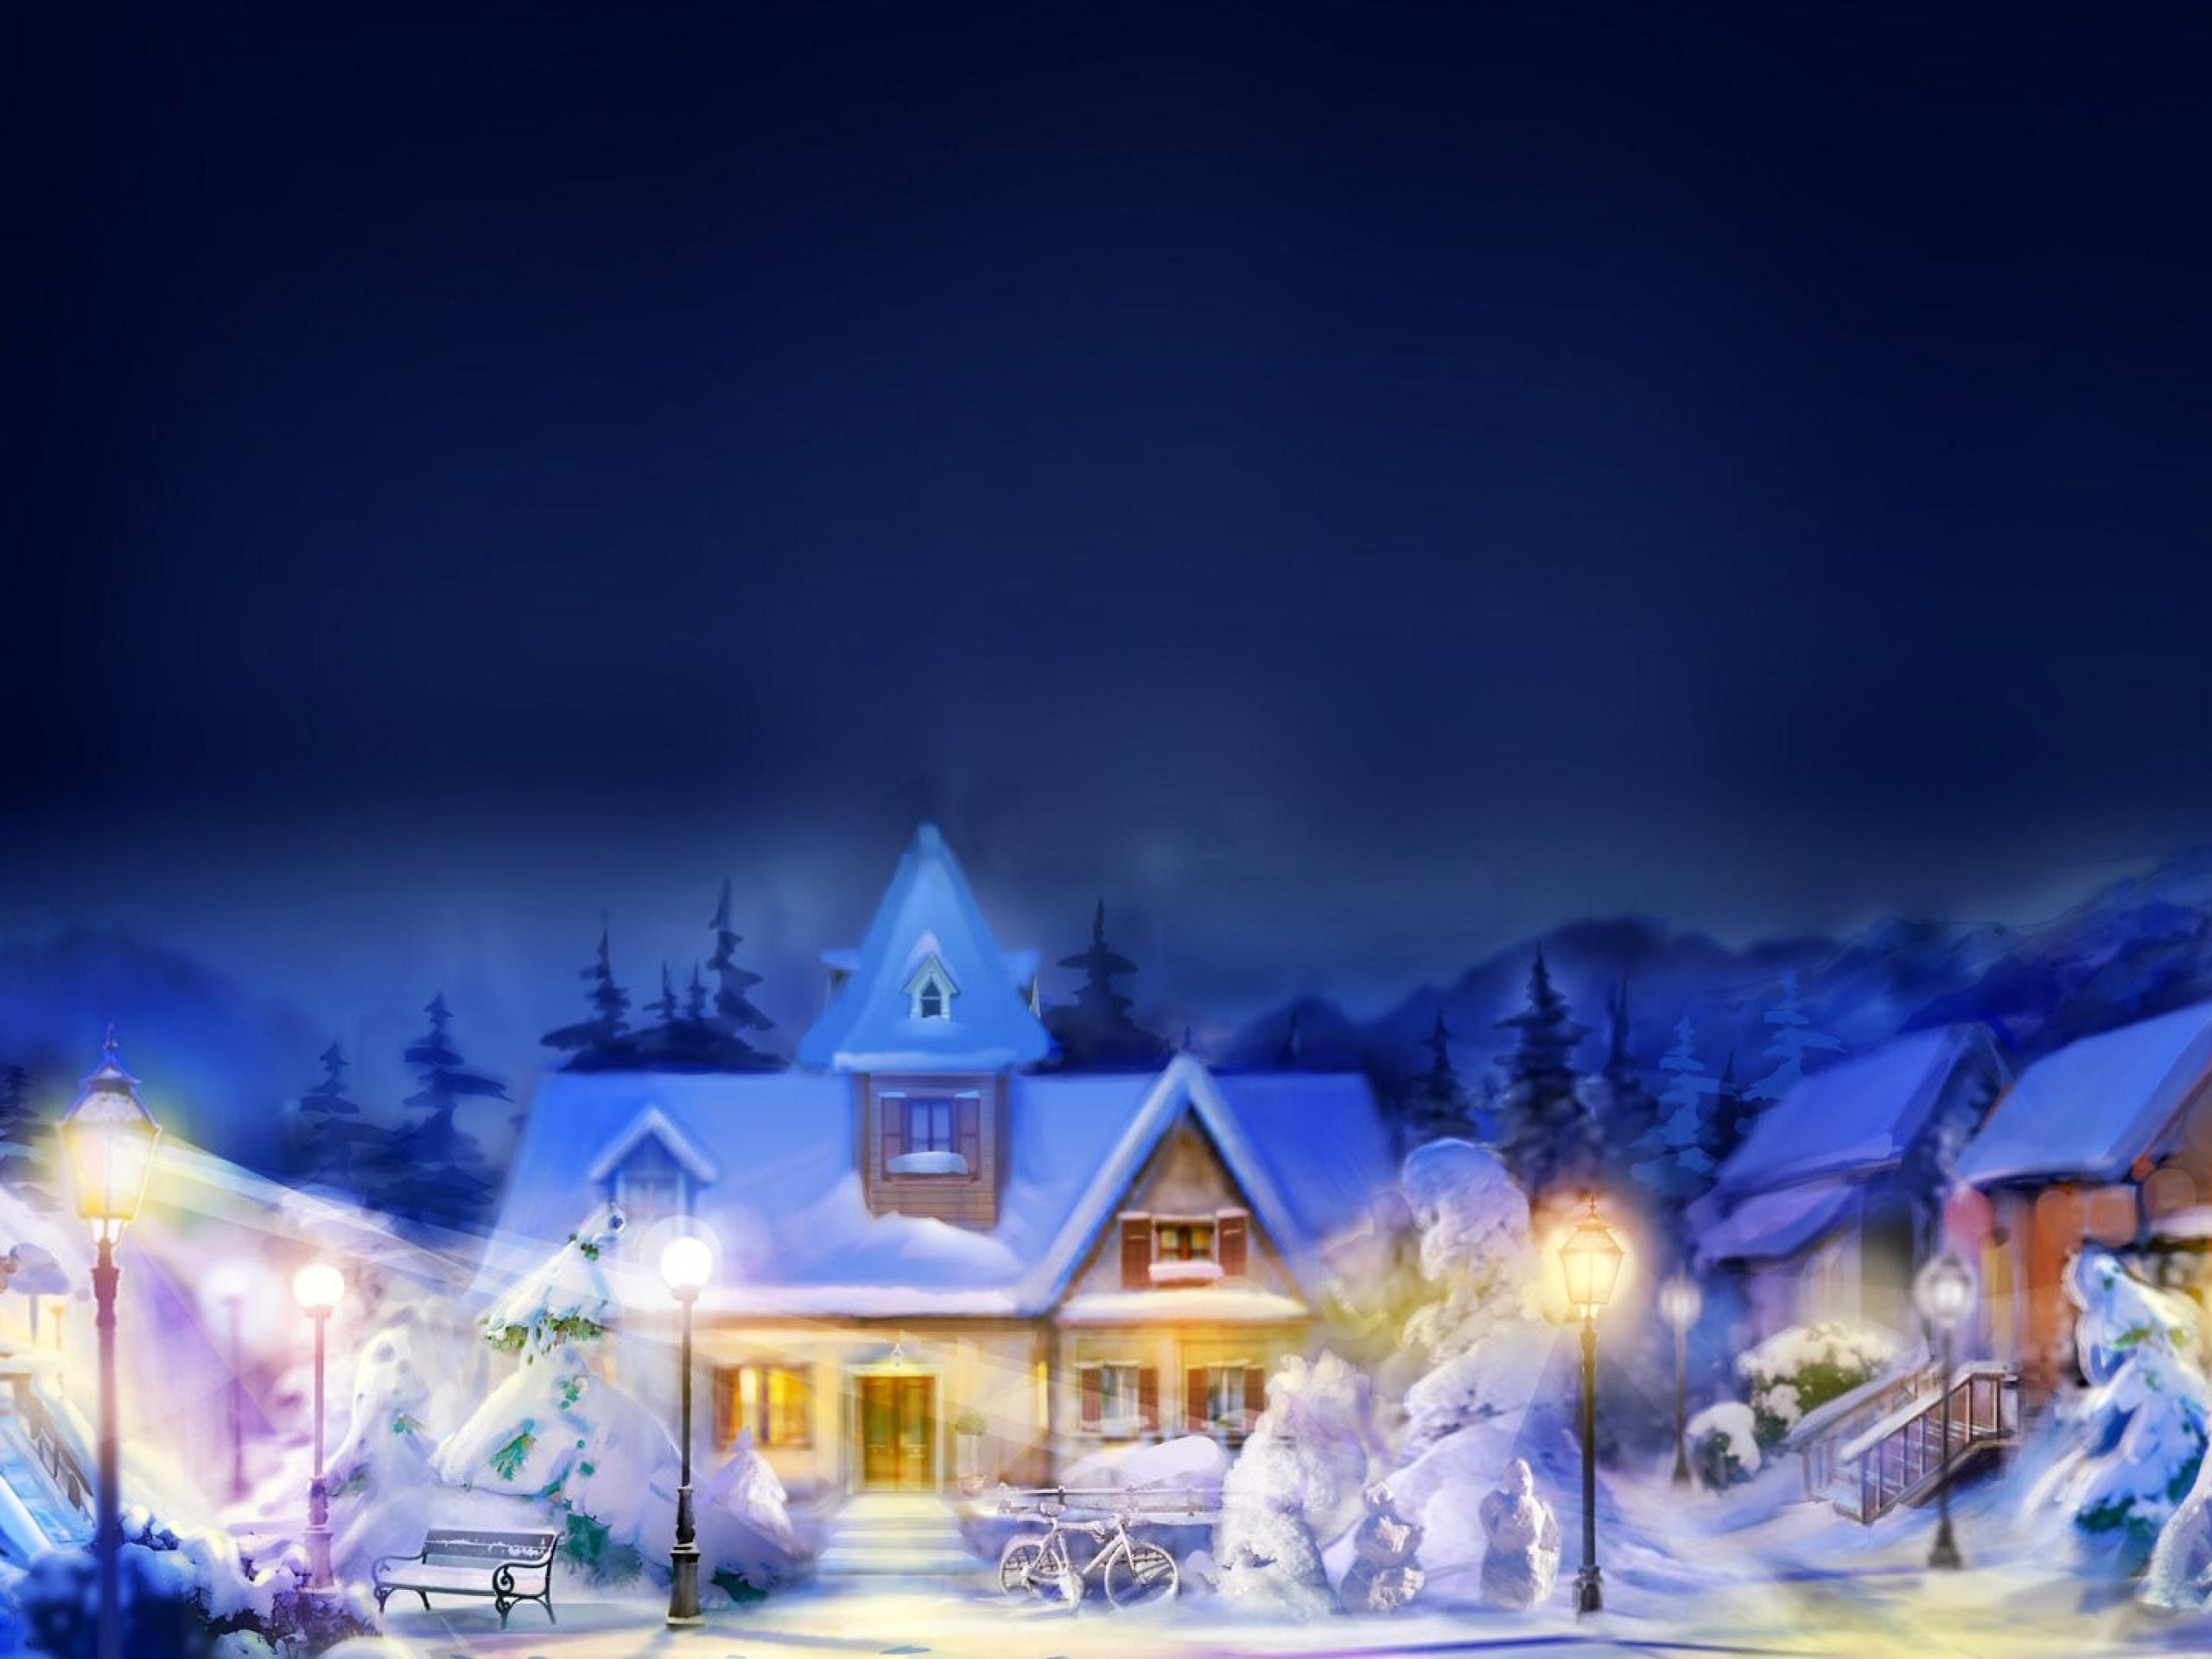 Winter Scenery Abstract Beautiful Christmas Cute Fantasy House